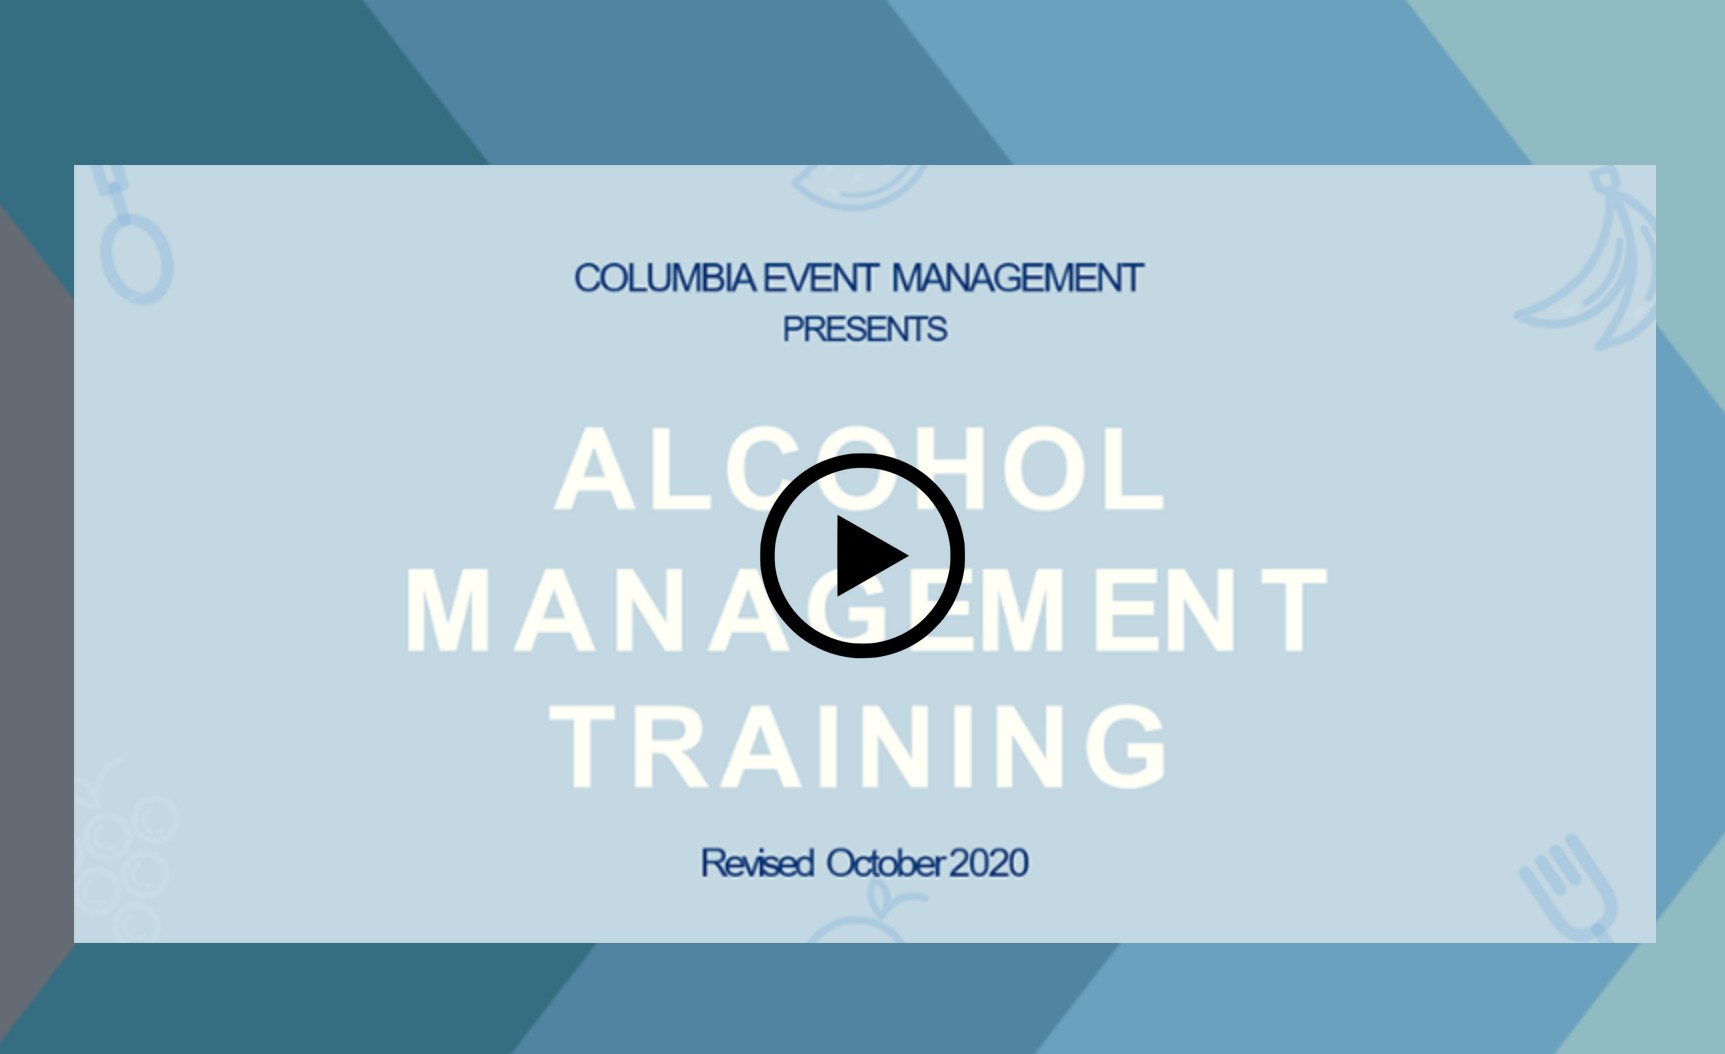 Screenshot from Event Management's Alcohol Management Training online session.